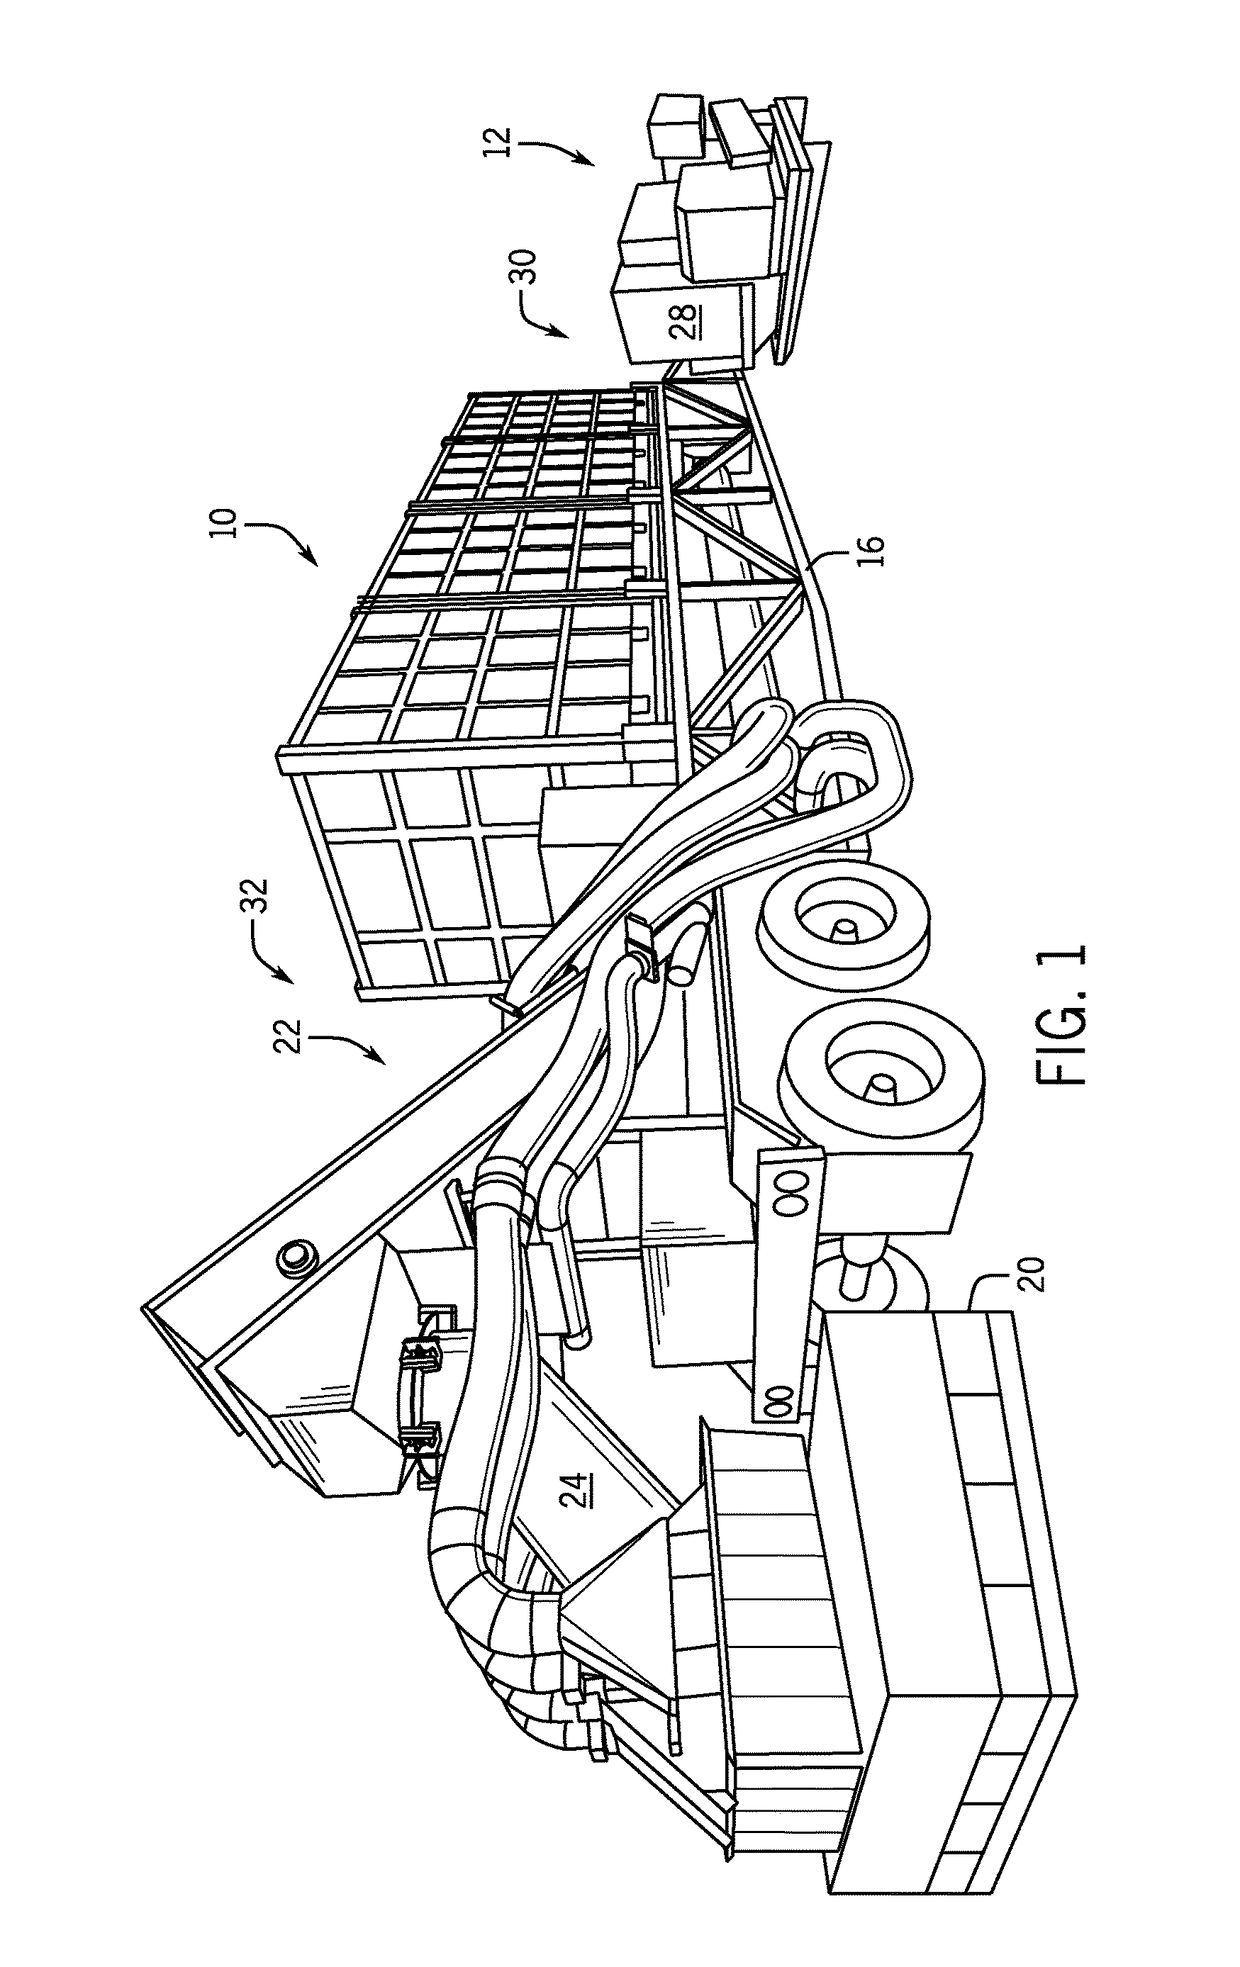 Conveyor with integrated dust collector system